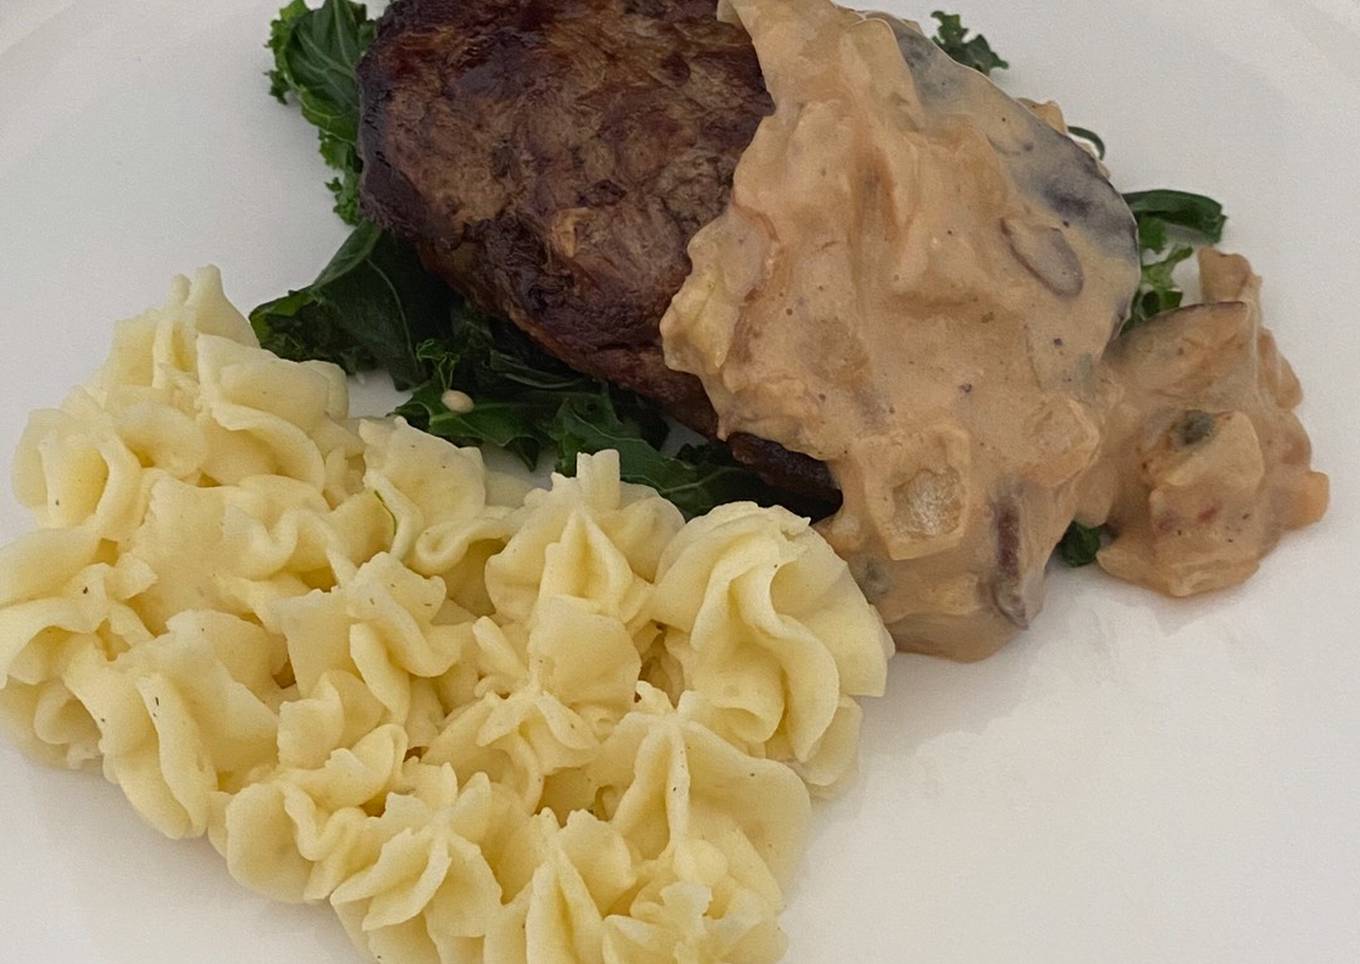 filet mignon with creamy mashed potato and kale served with a peppercorn sauce